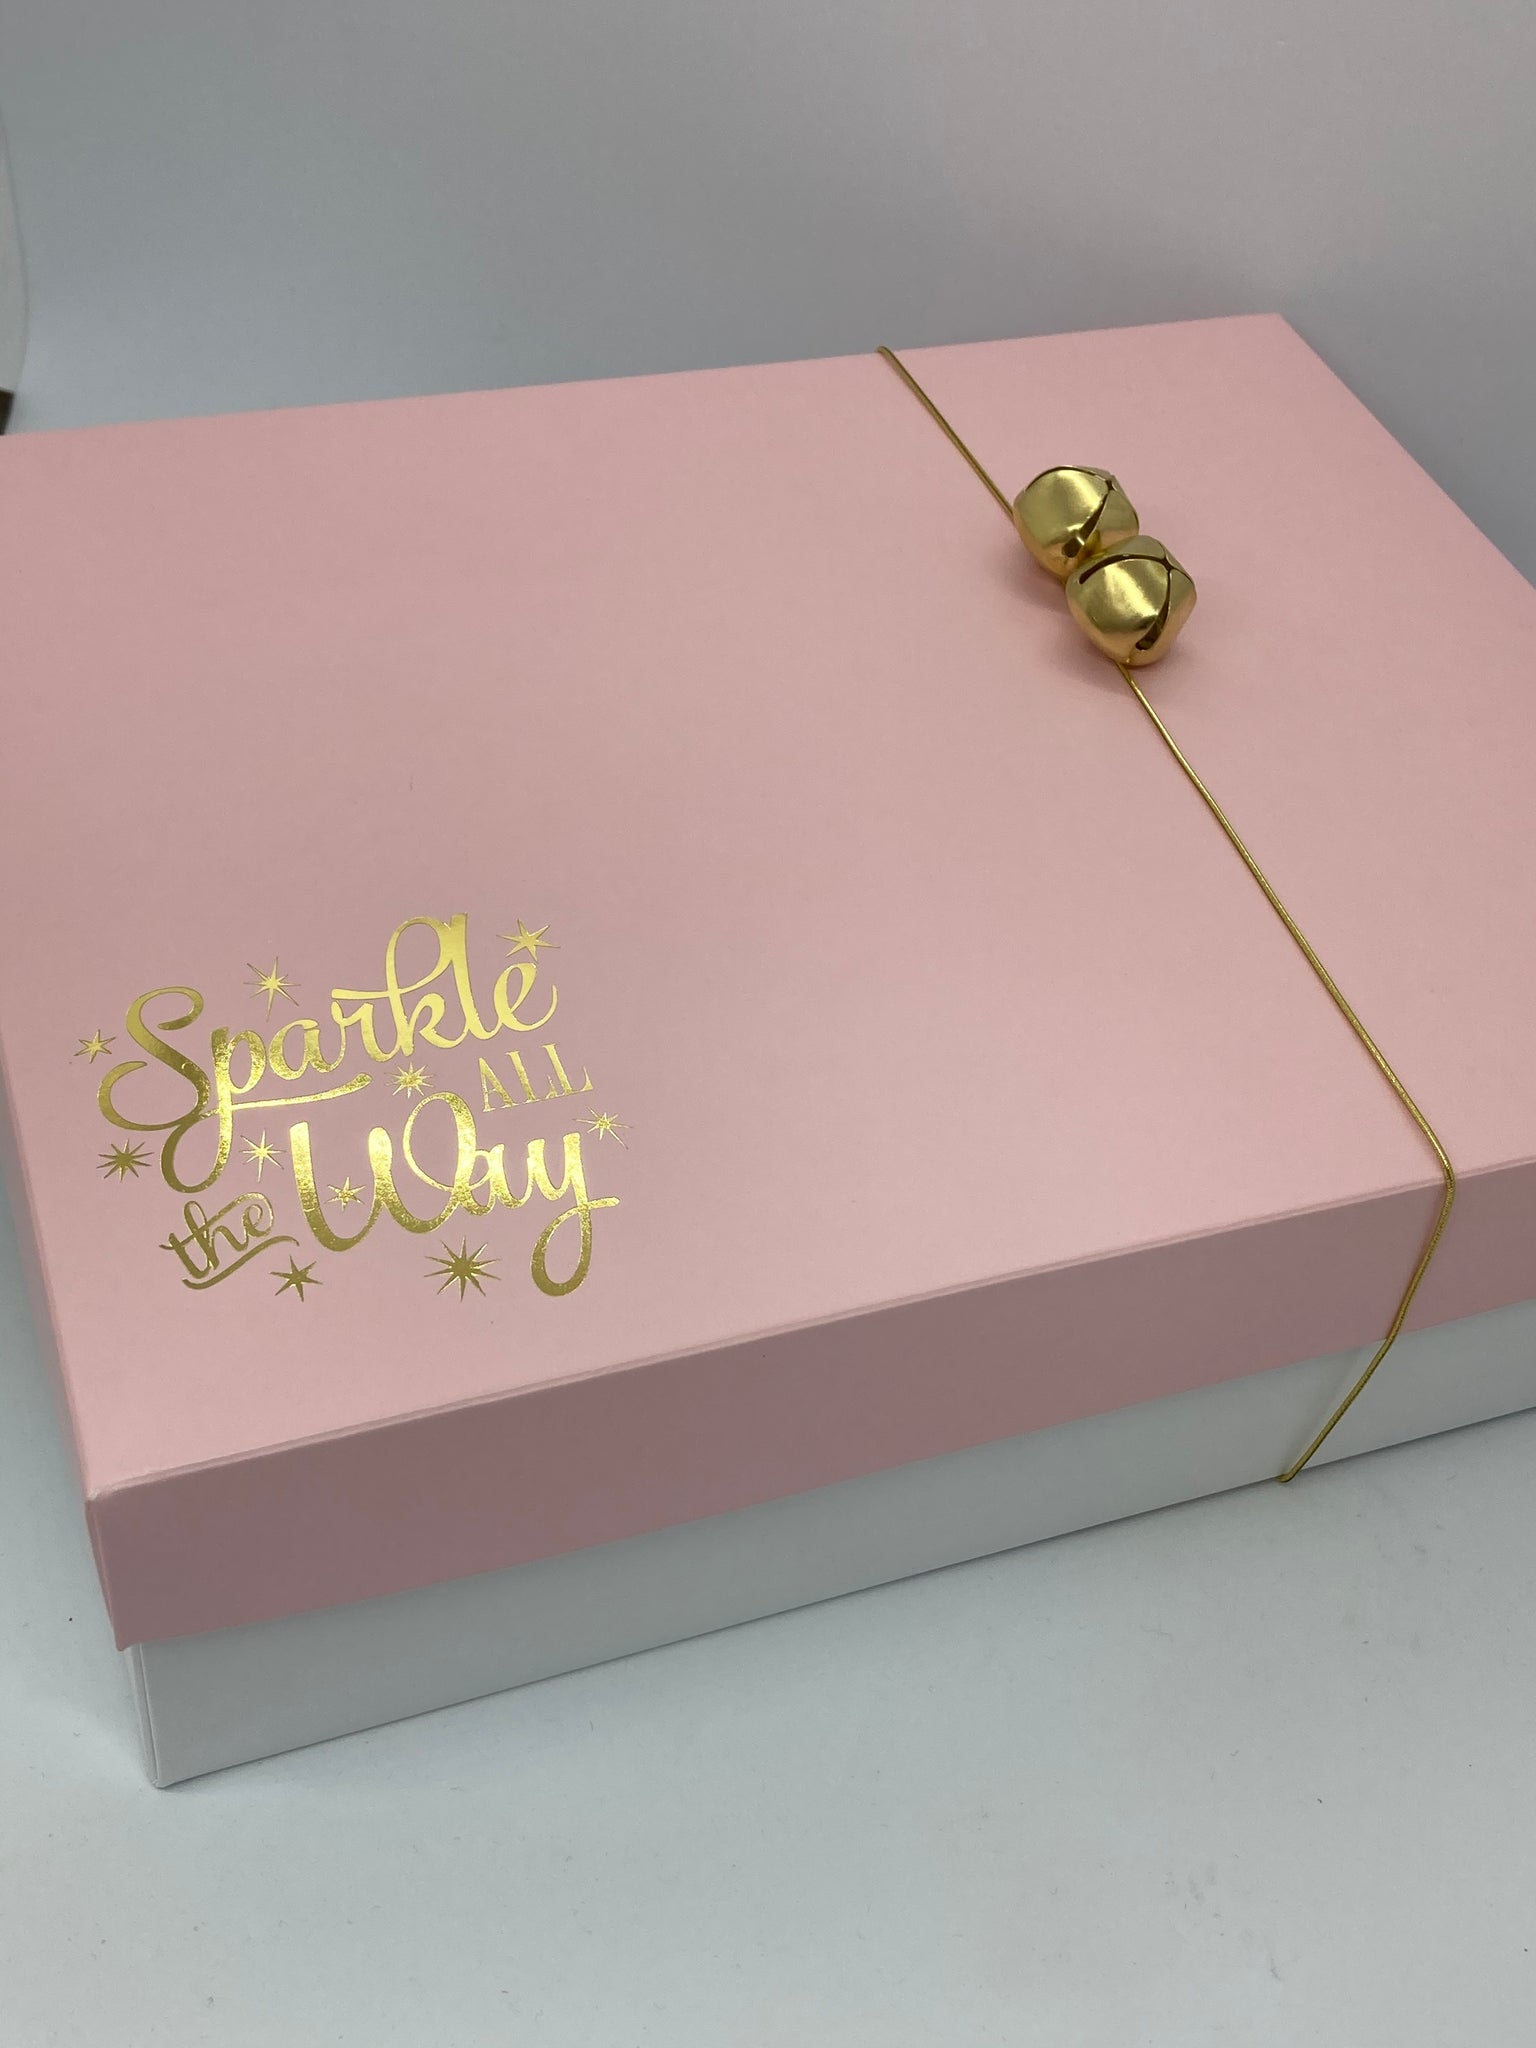 SPARKLE ALL THE WAY HAMPER/GIFT BOX PINK SOLID LID BLANK 240 x 195 x 70mm